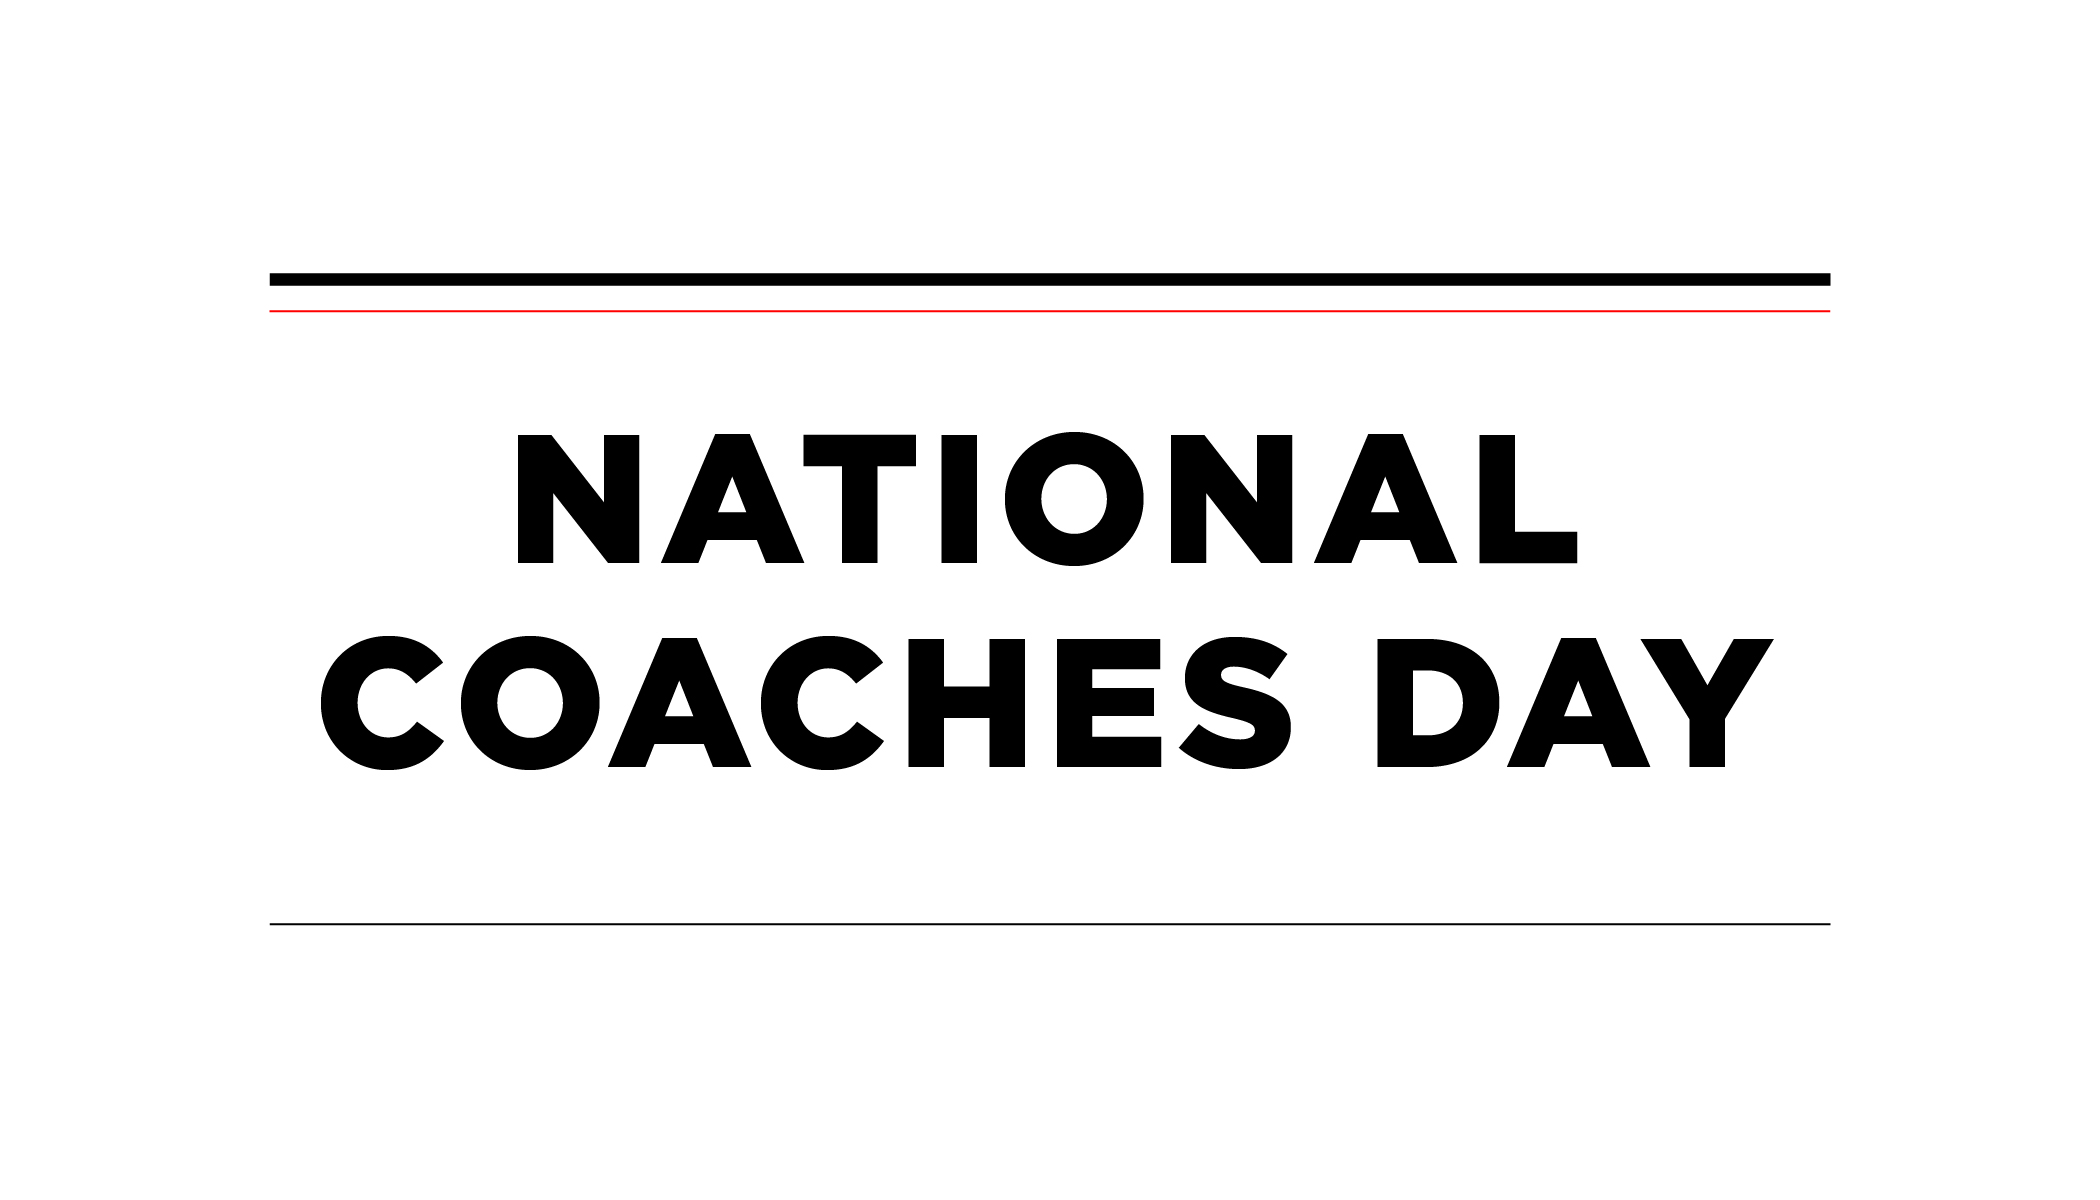 National Coaches Day!